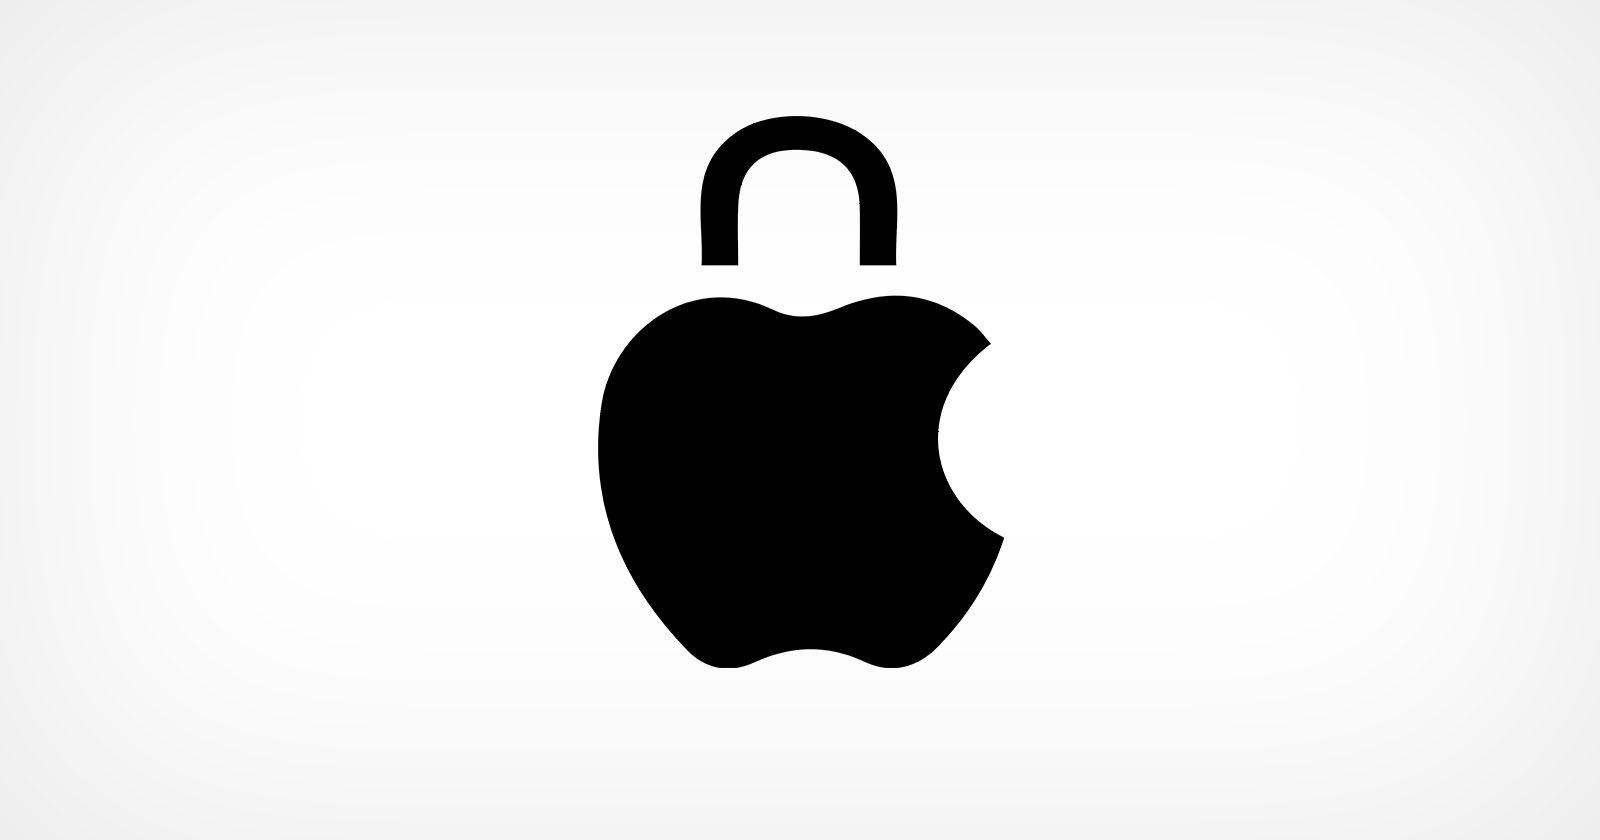  apple expands icloud encryption protect your photos 